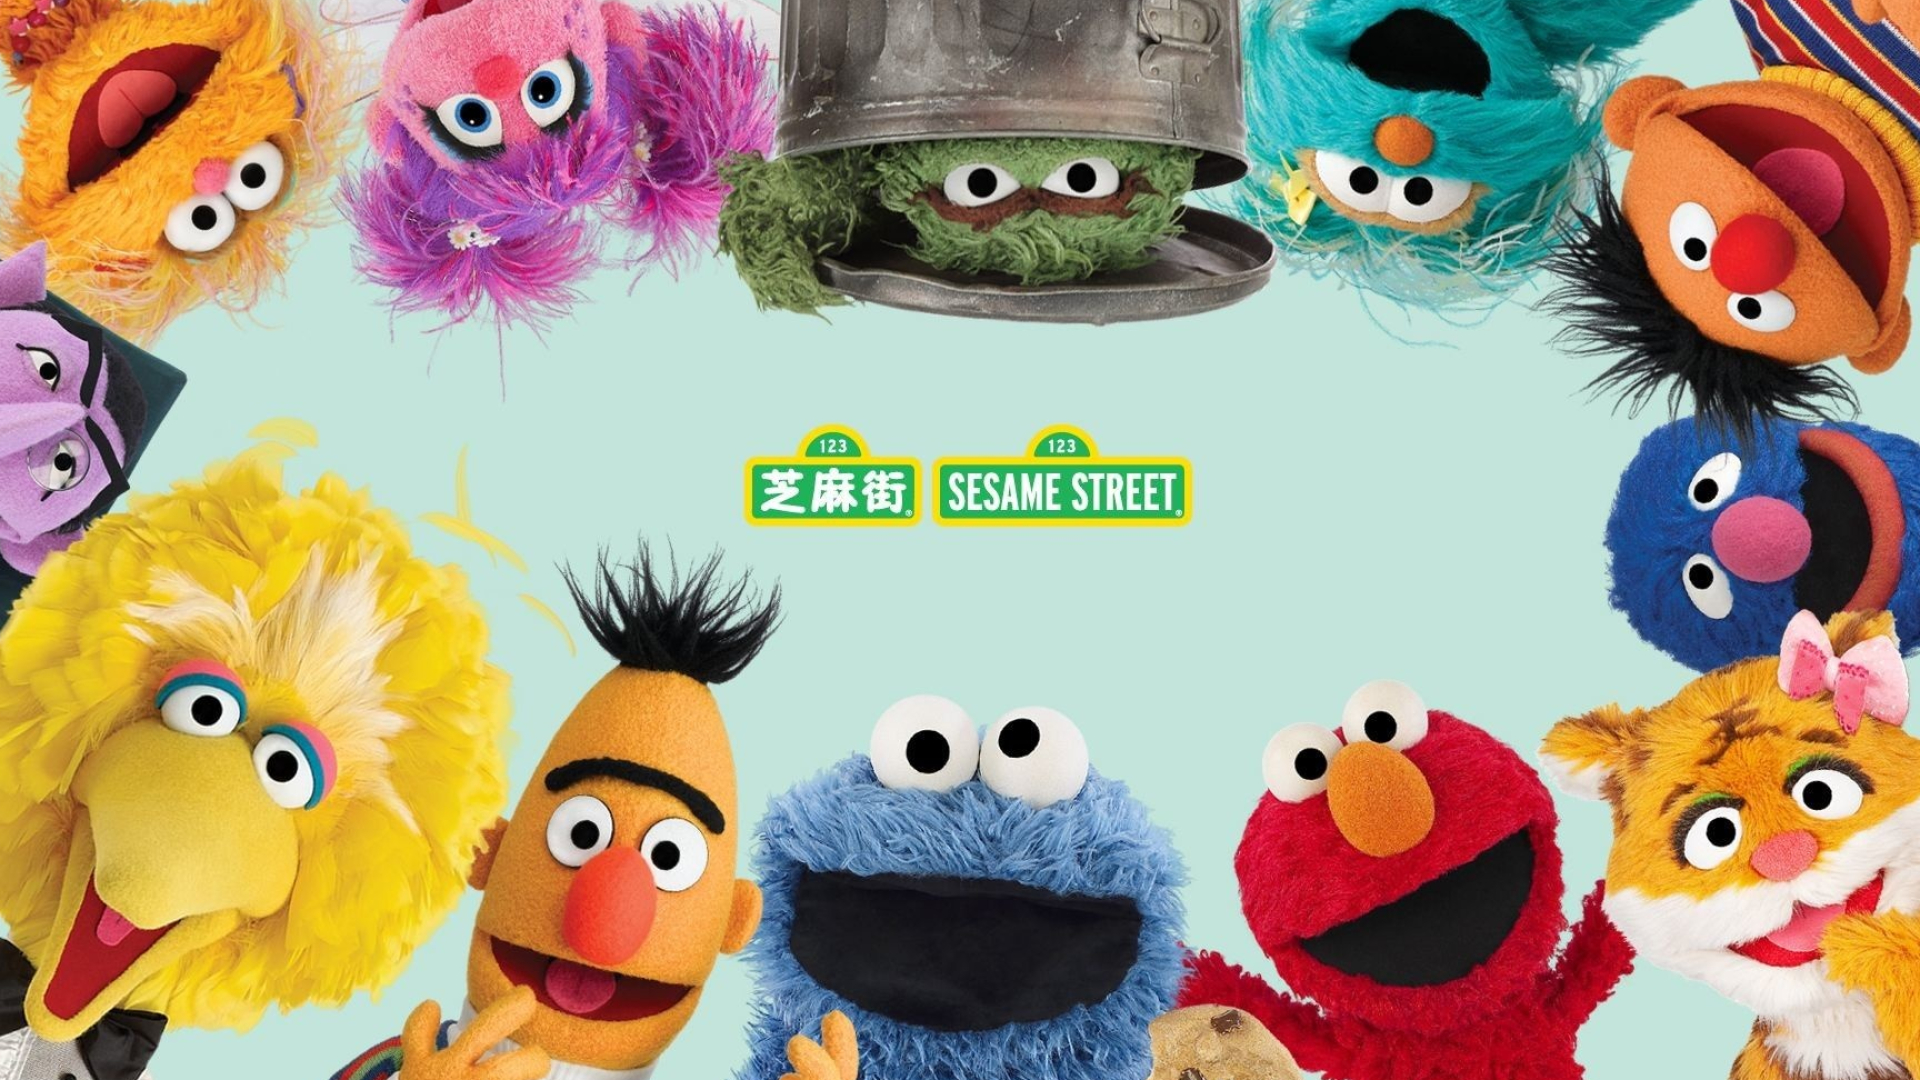 Sesame Street wallpapers, Popular collection, Eye-catching designs, Beloved characters, 1920x1080 Full HD Desktop